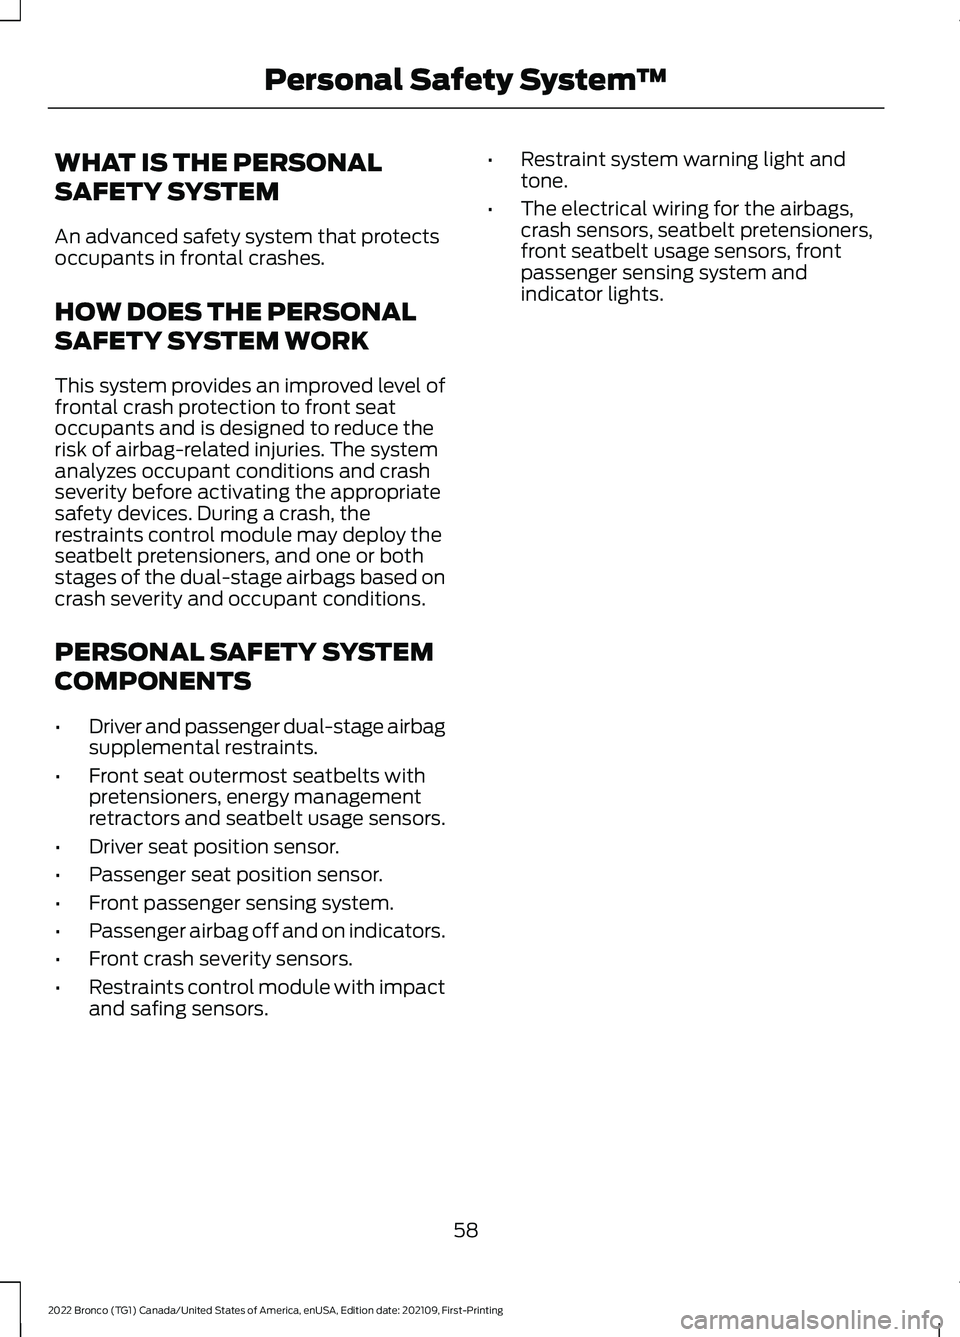 FORD BRONCO 2022  Owners Manual WHAT IS THE PERSONAL
SAFETY SYSTEM
An advanced safety system that protectsoccupants in frontal crashes.
HOW DOES THE PERSONAL
SAFETY SYSTEM WORK
This system provides an improved level offrontal crash 